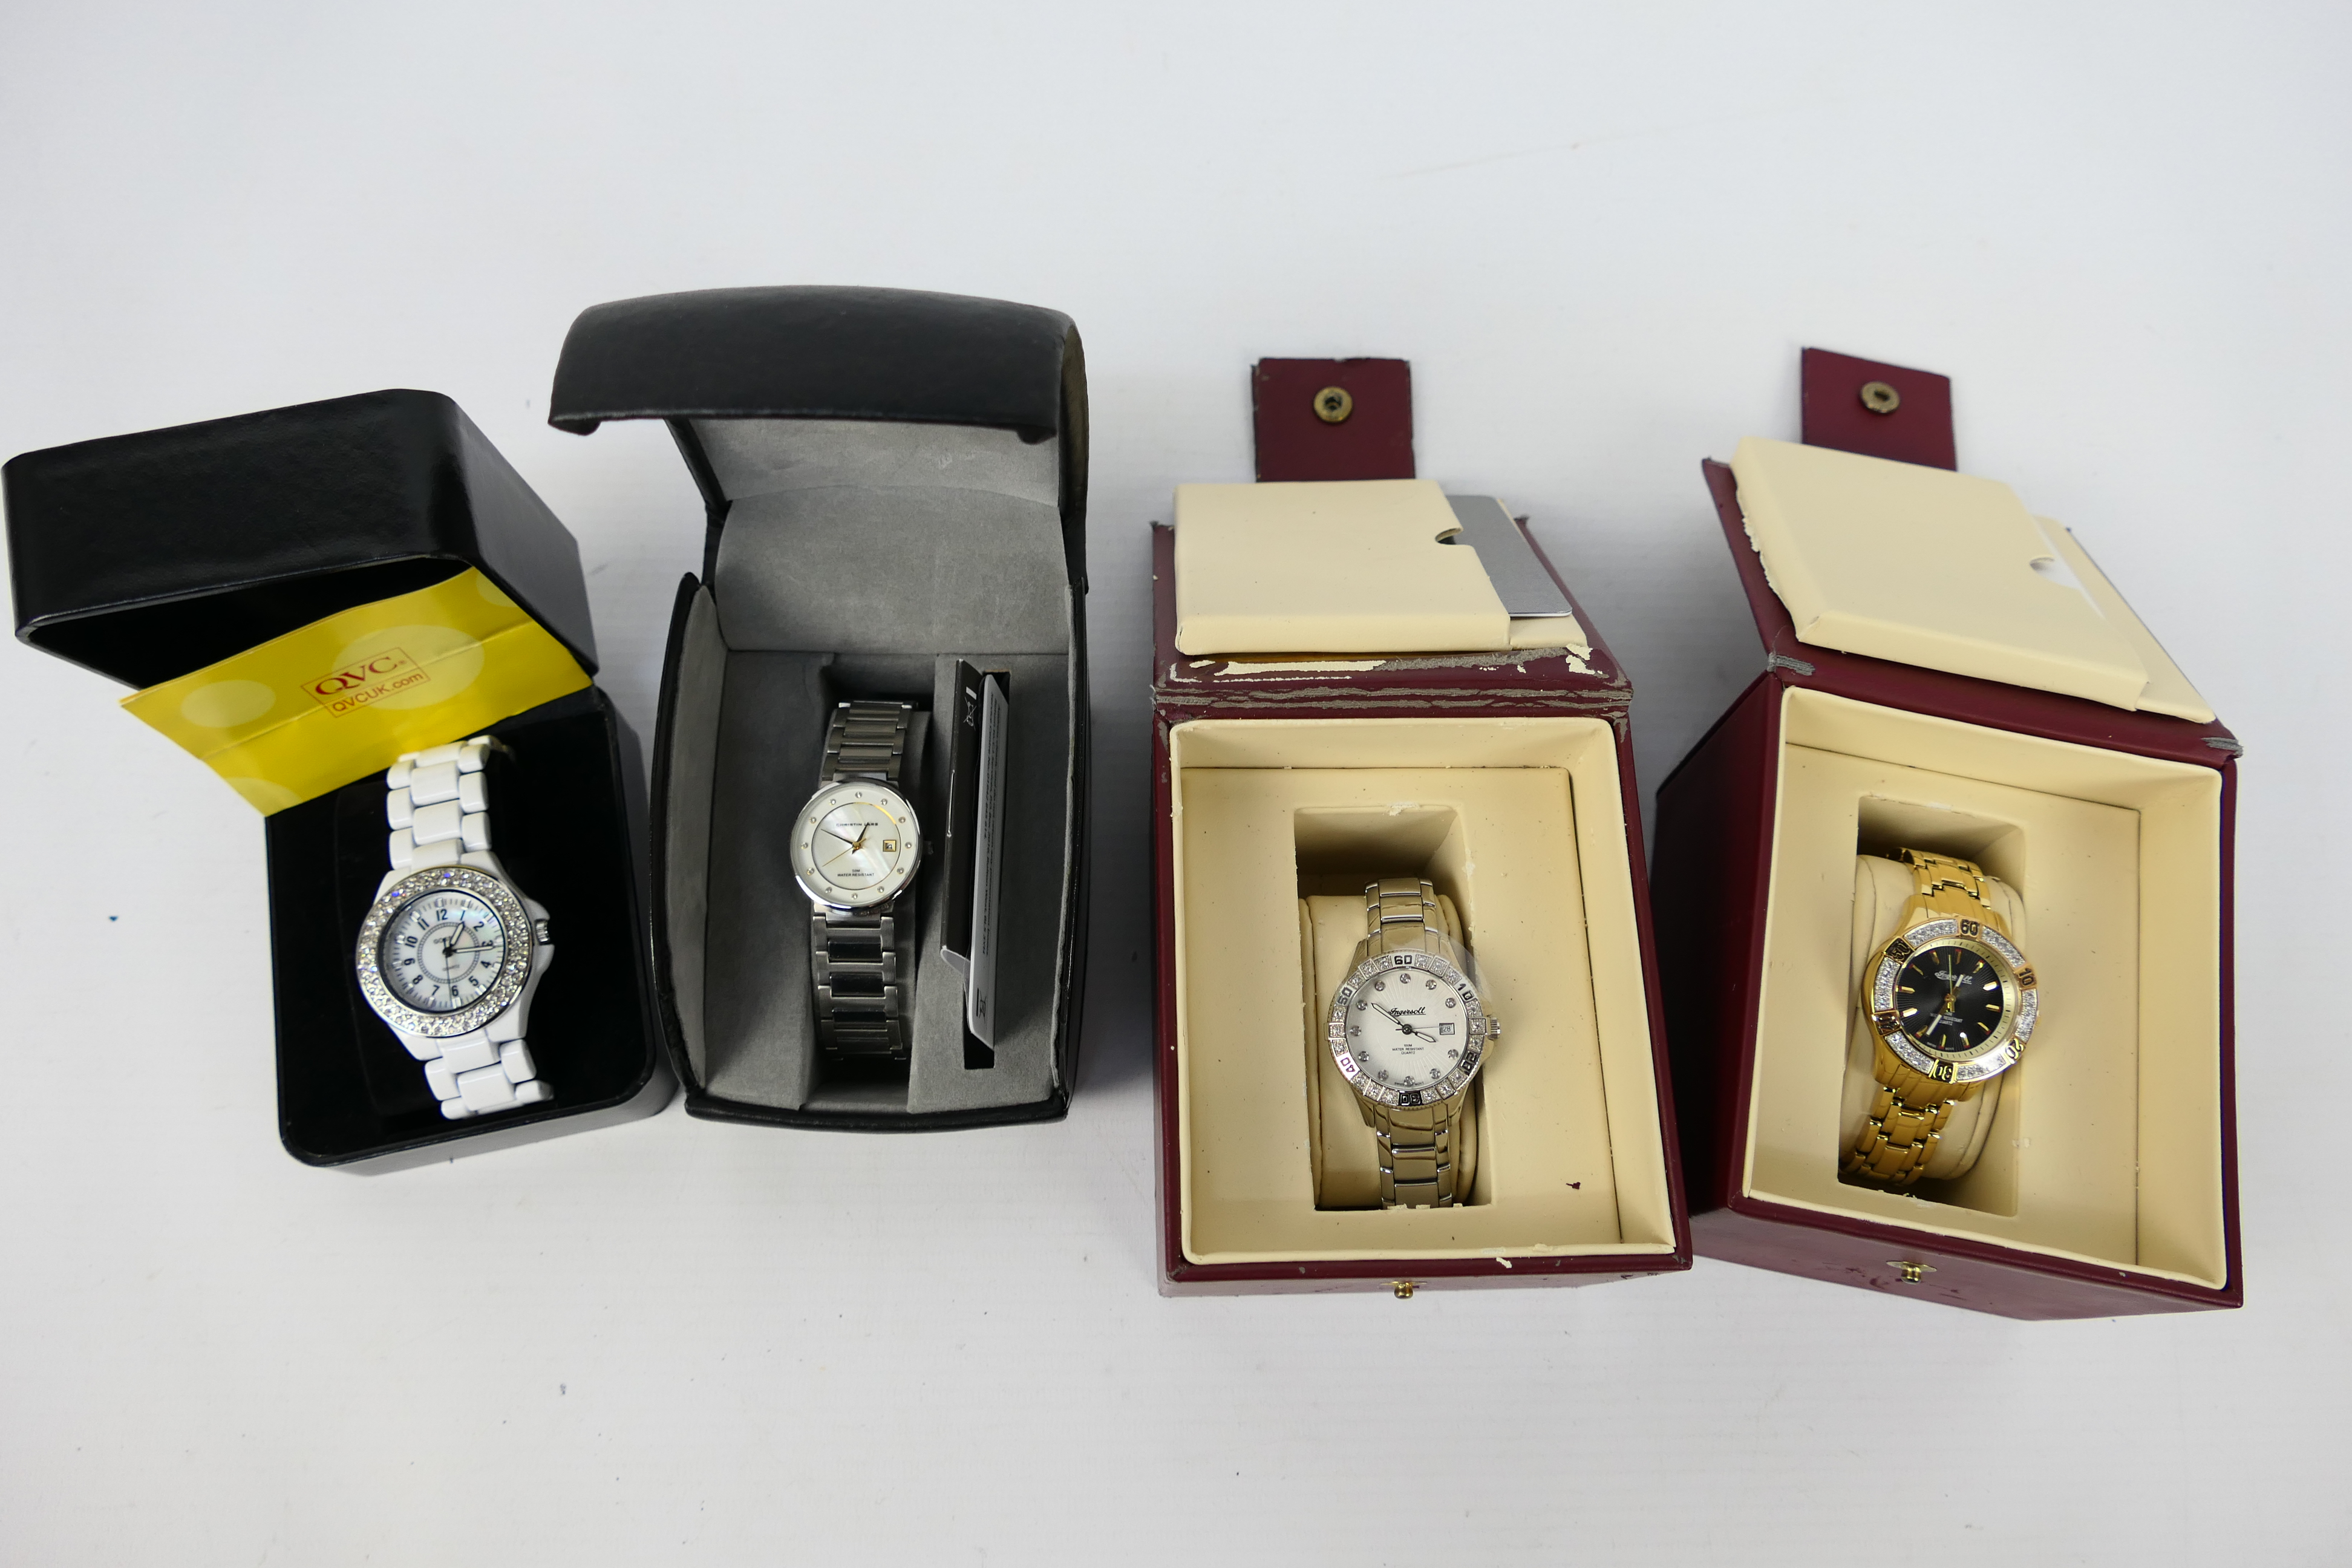 Boxed fashion wrist watches to include two Ingersoll Gems Series watches, Christin Lars and other.